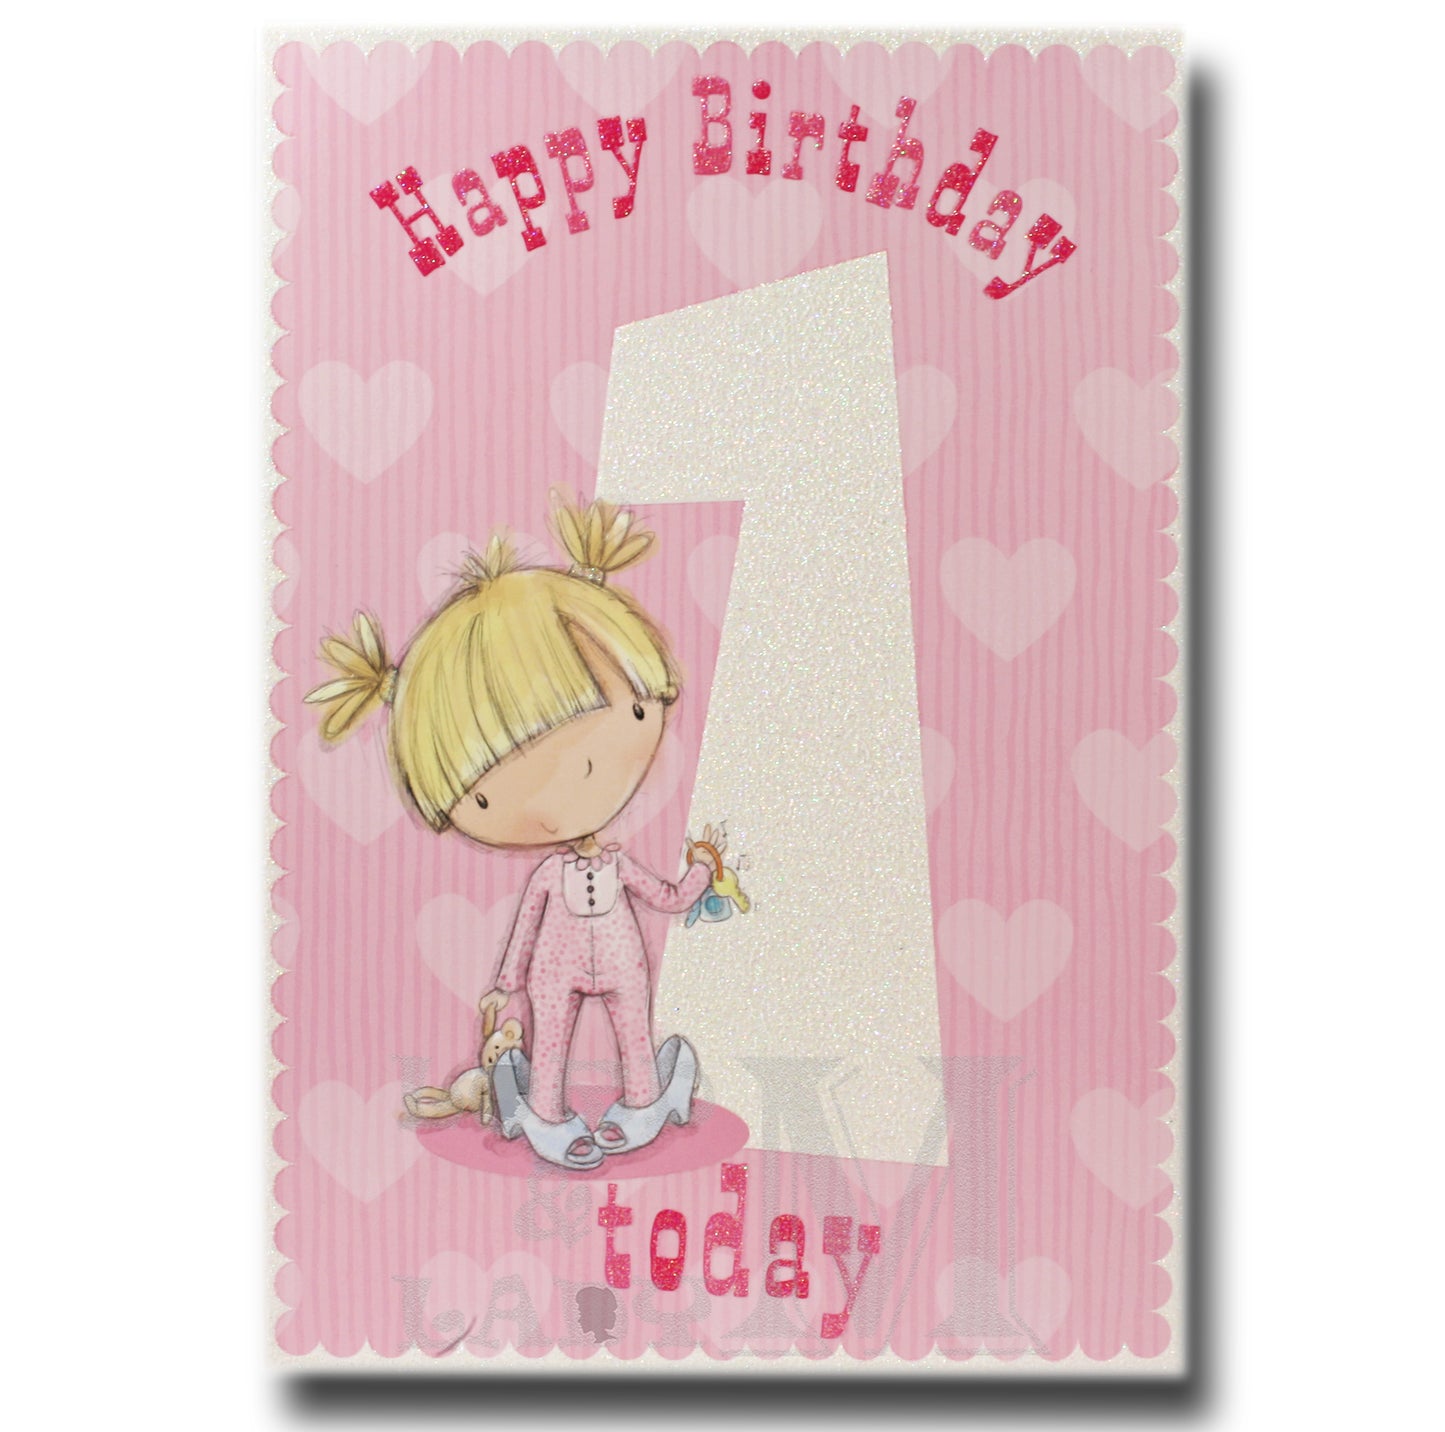 24cm - Happy Birthday 1 Today - Pink - Lge Let - E